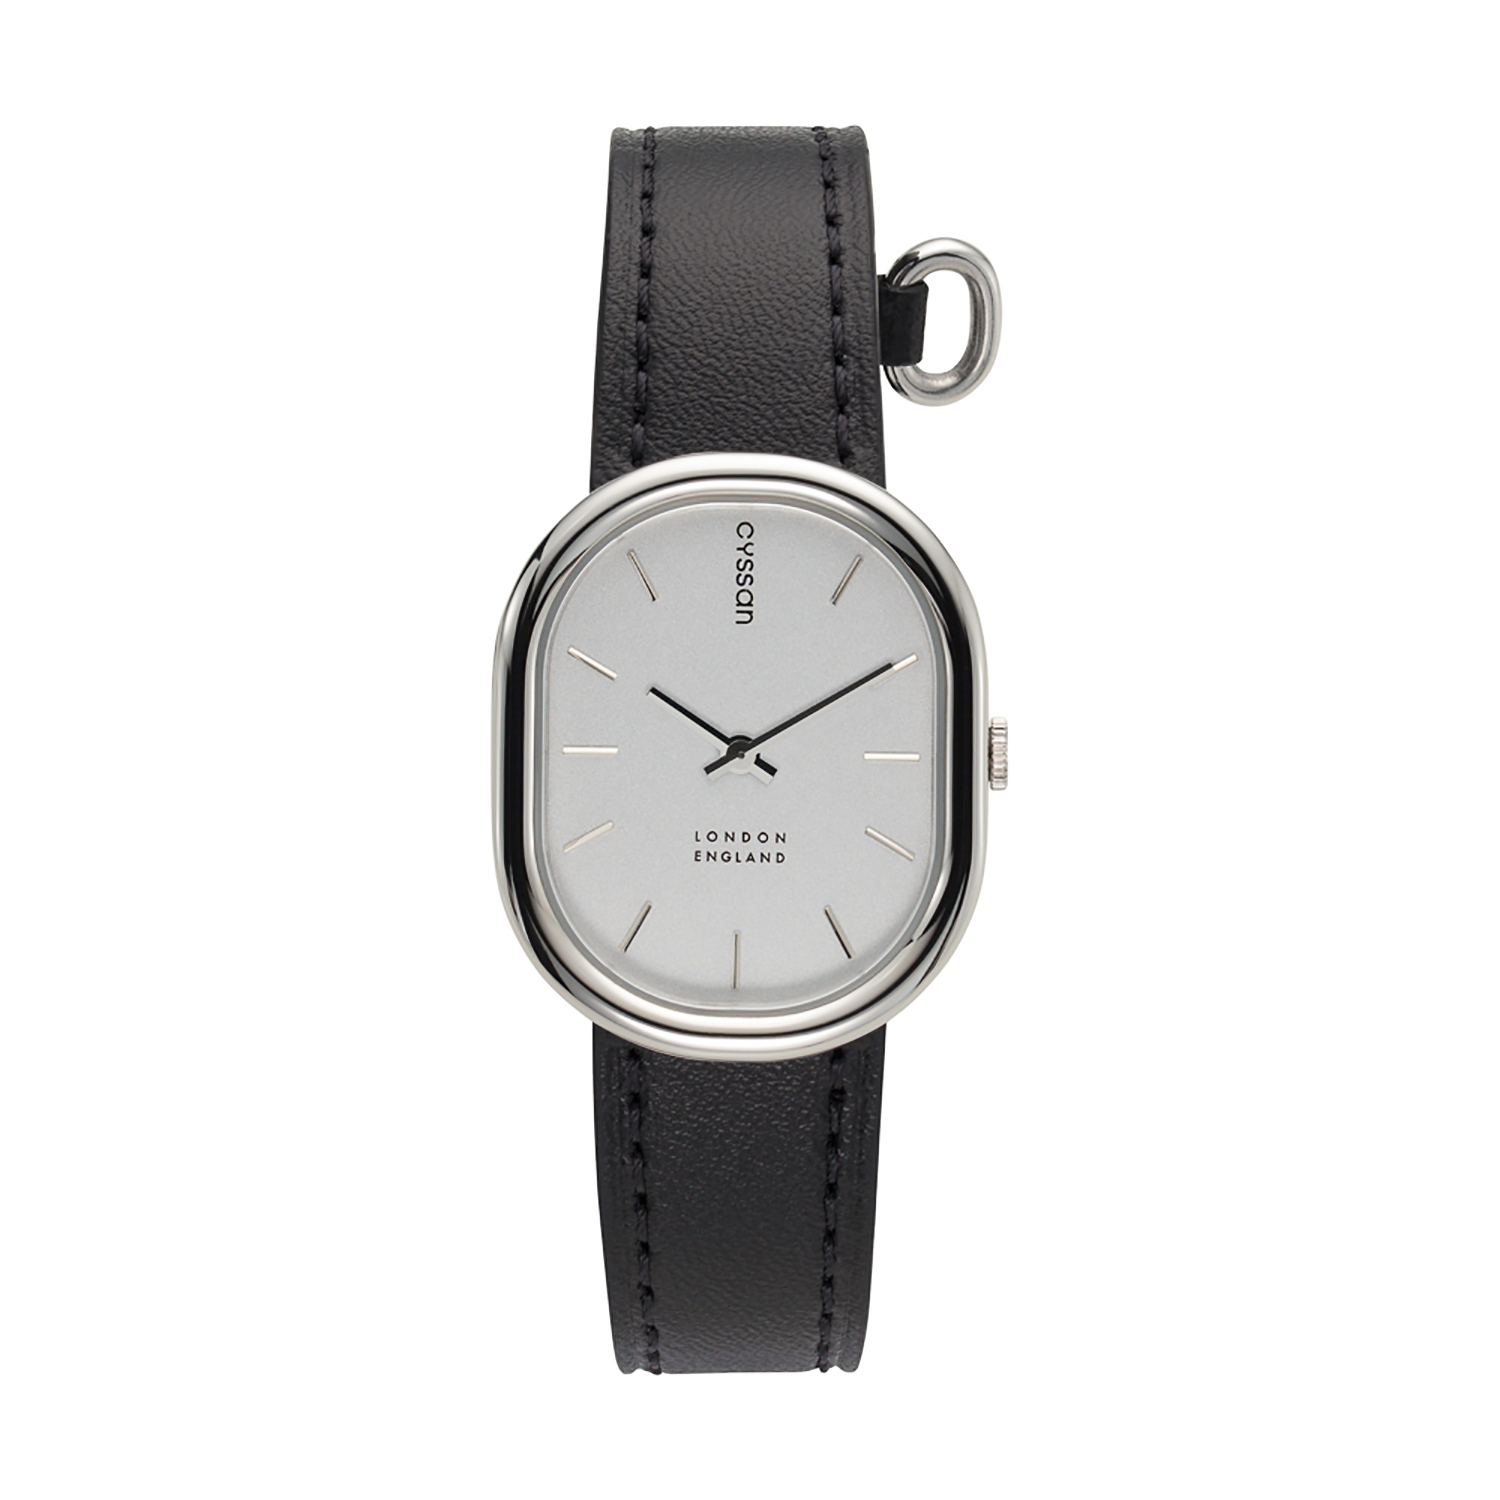 women's fgashion watch with a stainless steel watch case, silver-tone dial, and black vegan-leather strap.